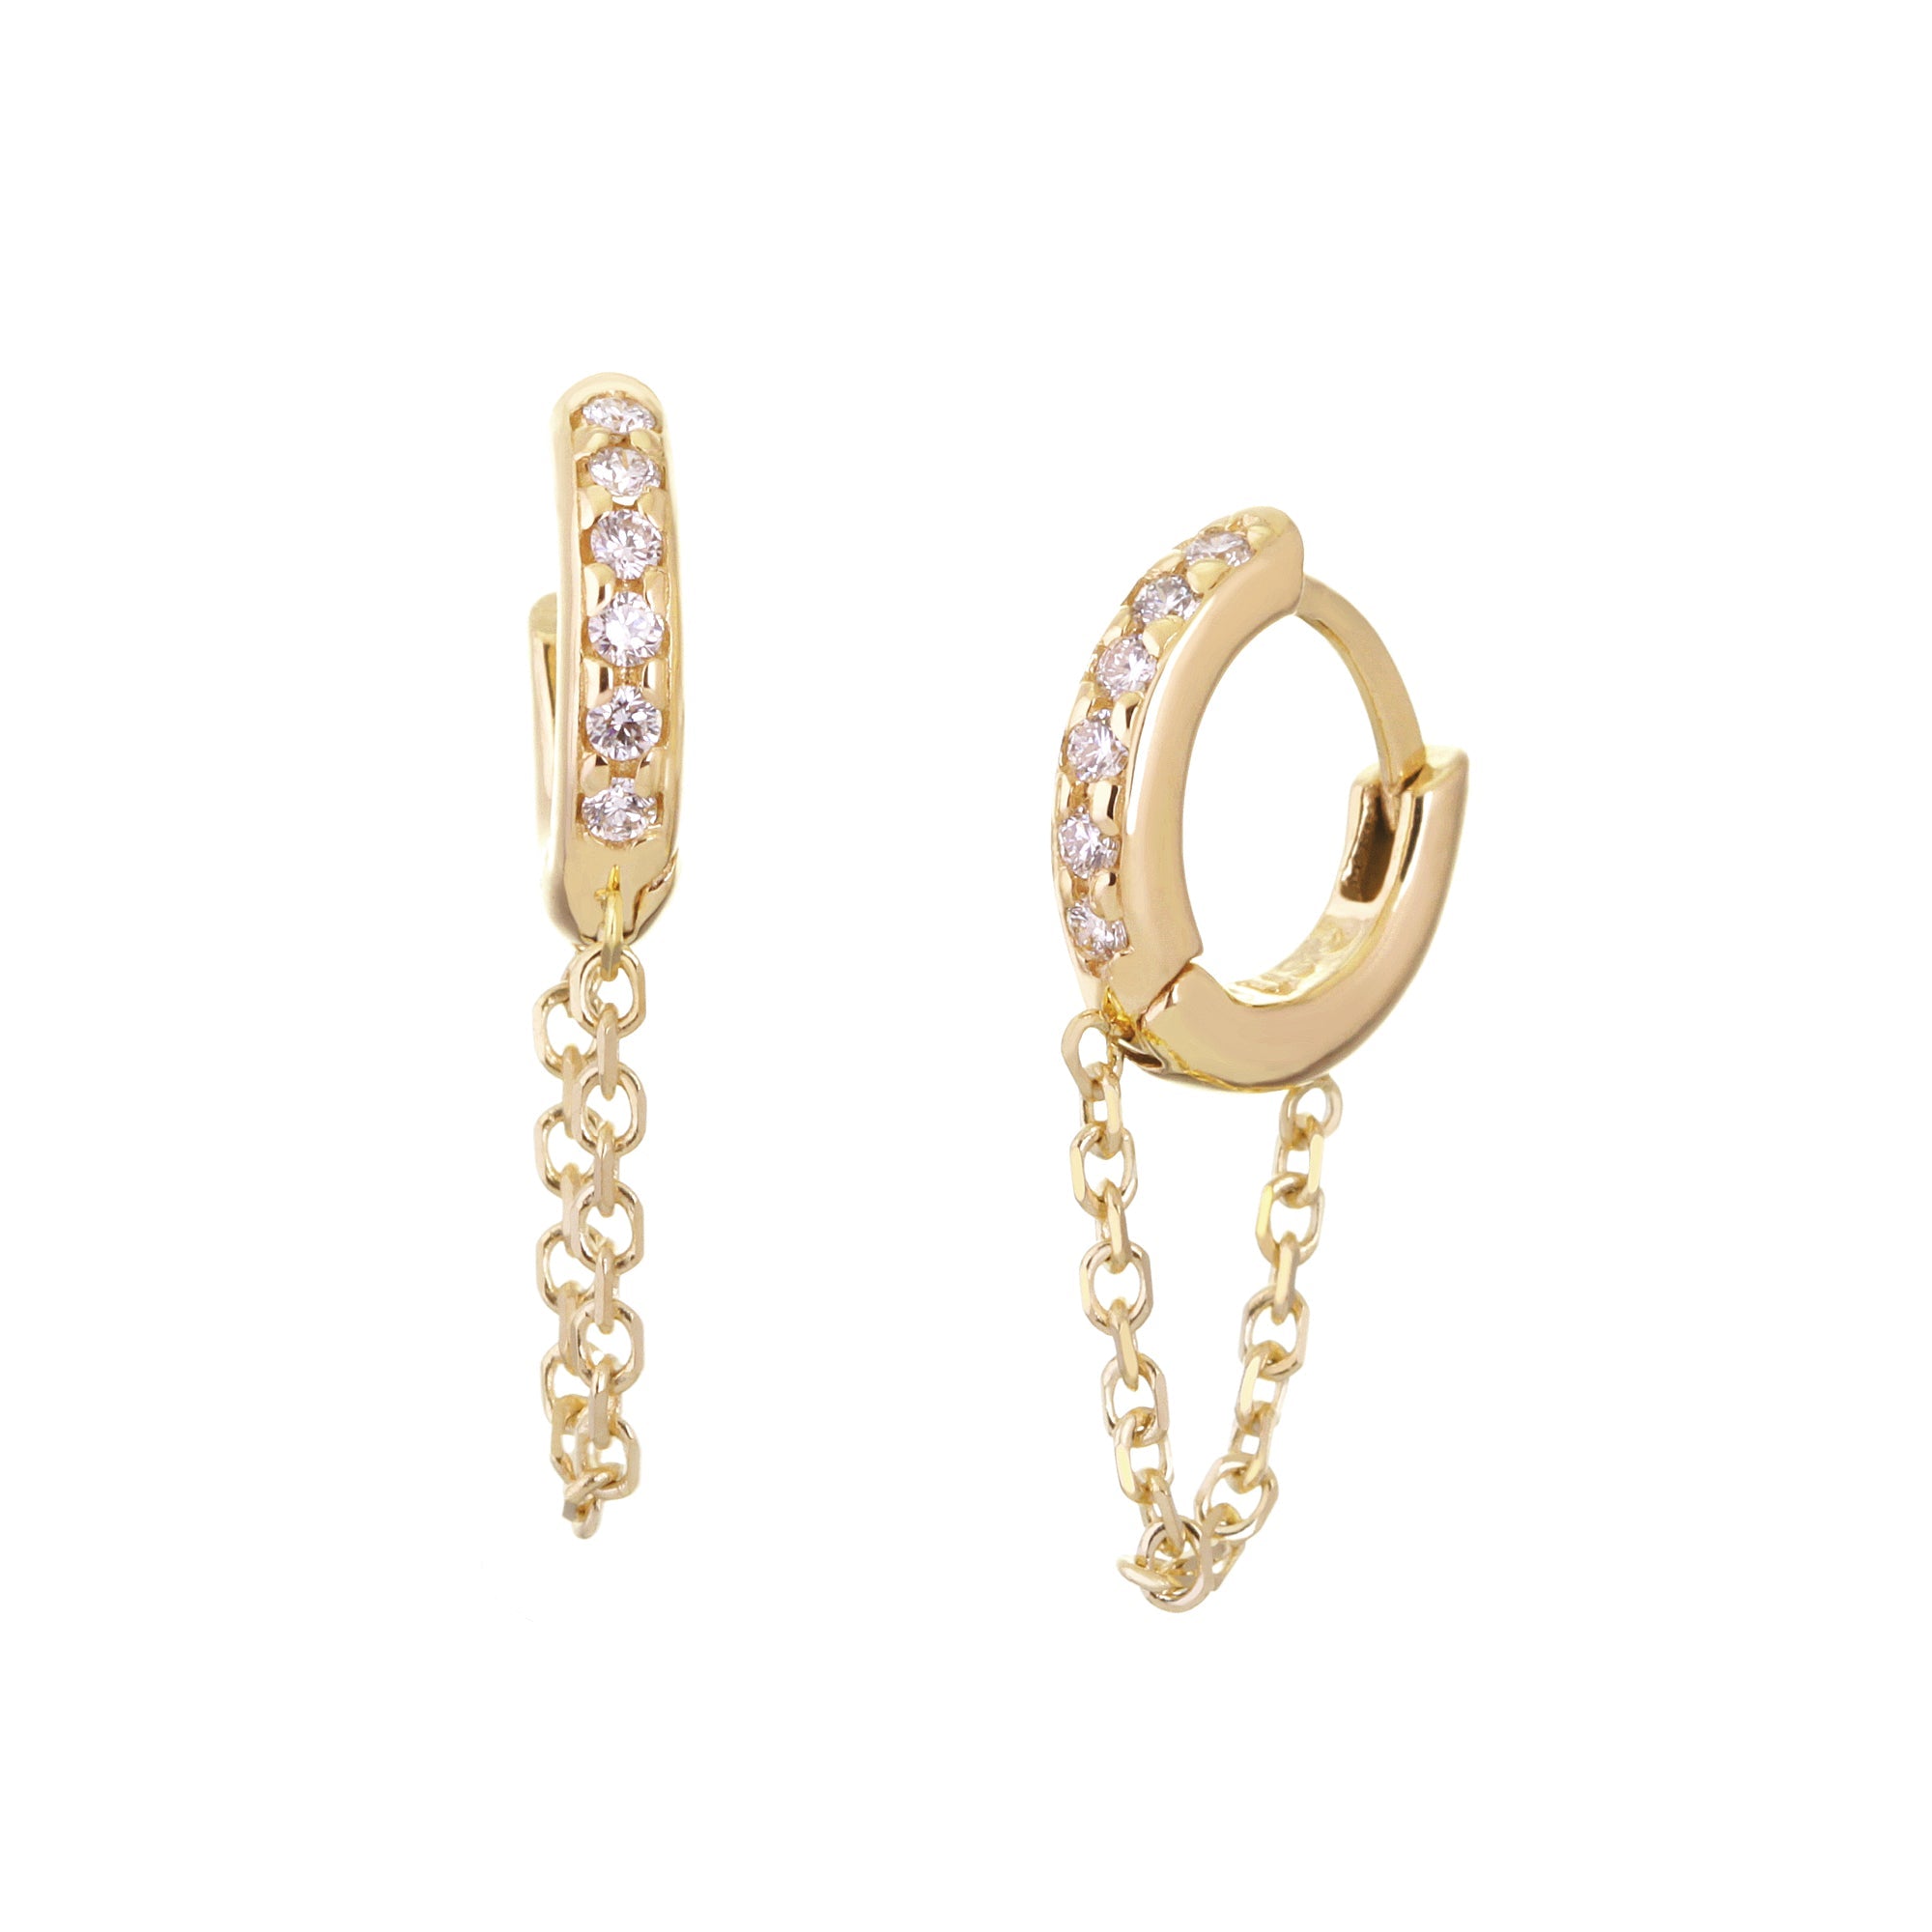 12.5MM DIAMOND AND 14K GOLD HUGGIES WITH CHAIN by eklexic